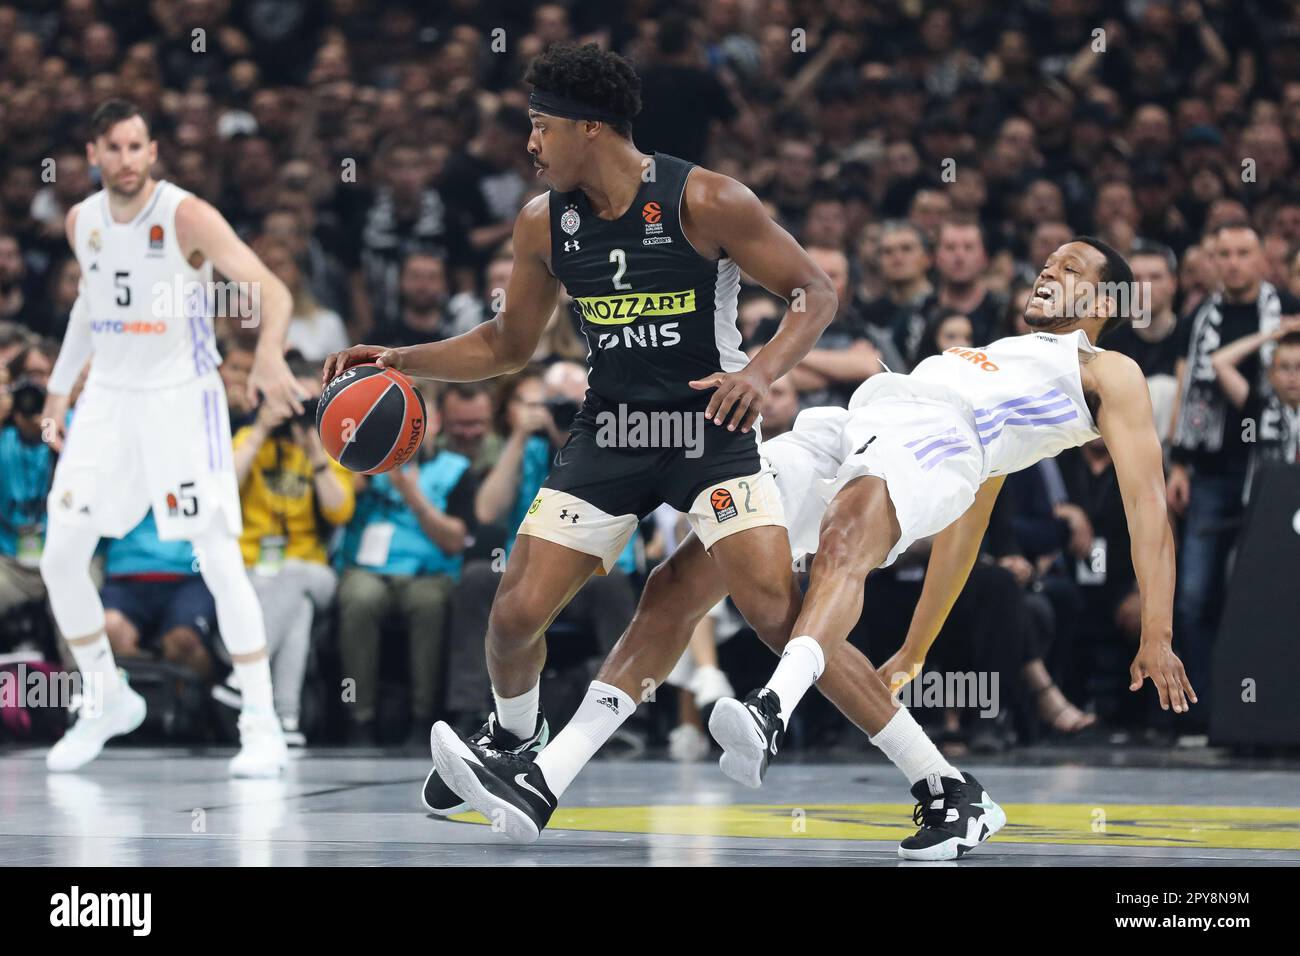 Belgrade, Serbia, 2 May 2023. Zach Leday of Partizan Mozzart Bet Belgrade competes against Anthony Randolph of Real Madrid during the Play Offs Game 3 - 2022/2023 Turkish Airlines EuroLeague match between Partizan Mozzart Bet Belgrade and Real Madrid at Stark Arena in Belgrade, Serbia. May 2, 2023. Credit: Nikola Krstic/Alamy Stock Photo